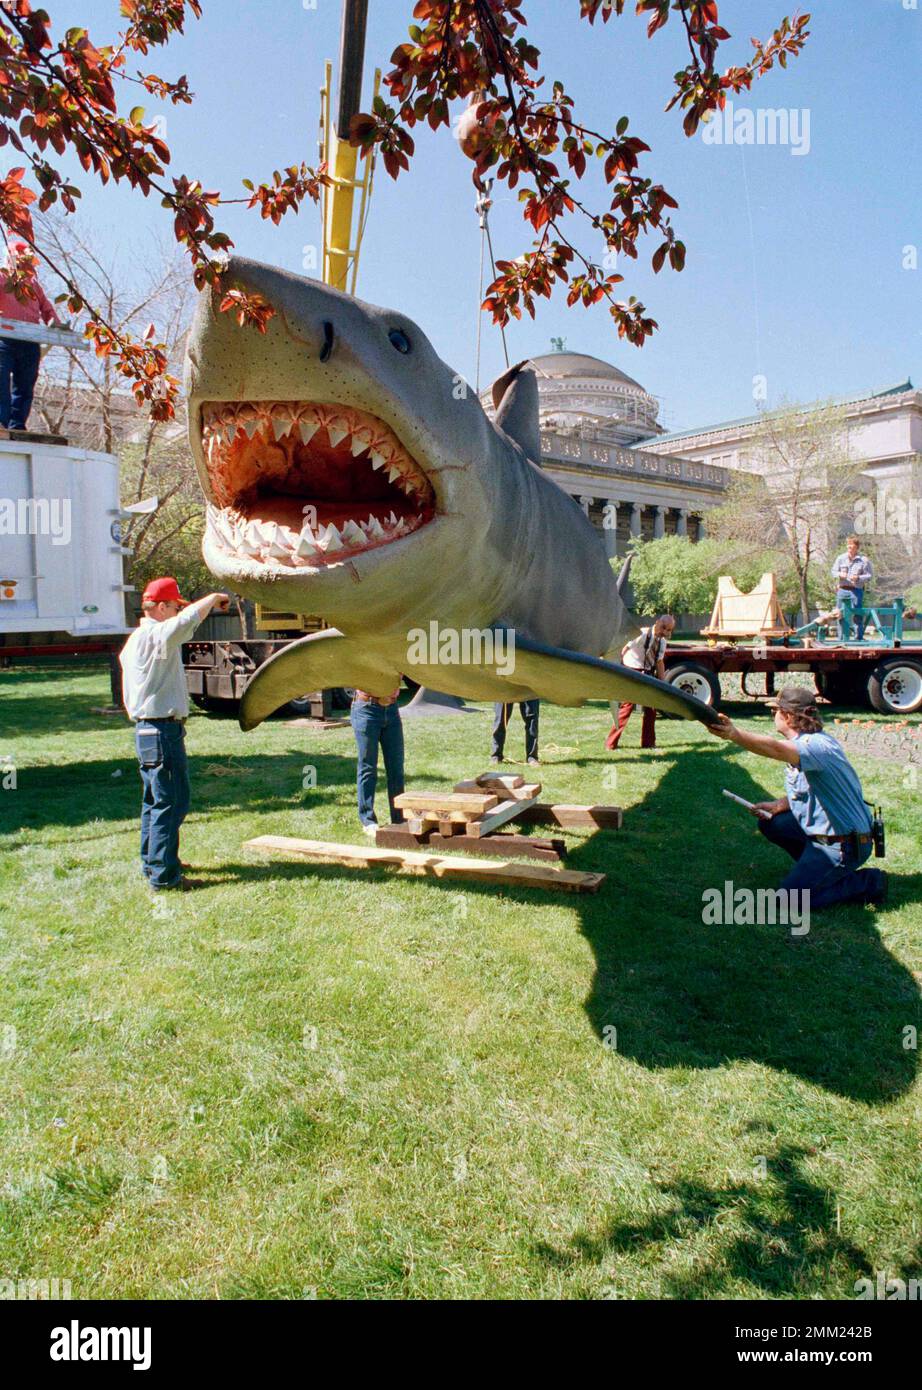 the 25-foot, 4,000-pound mechanical killer shark from the movie